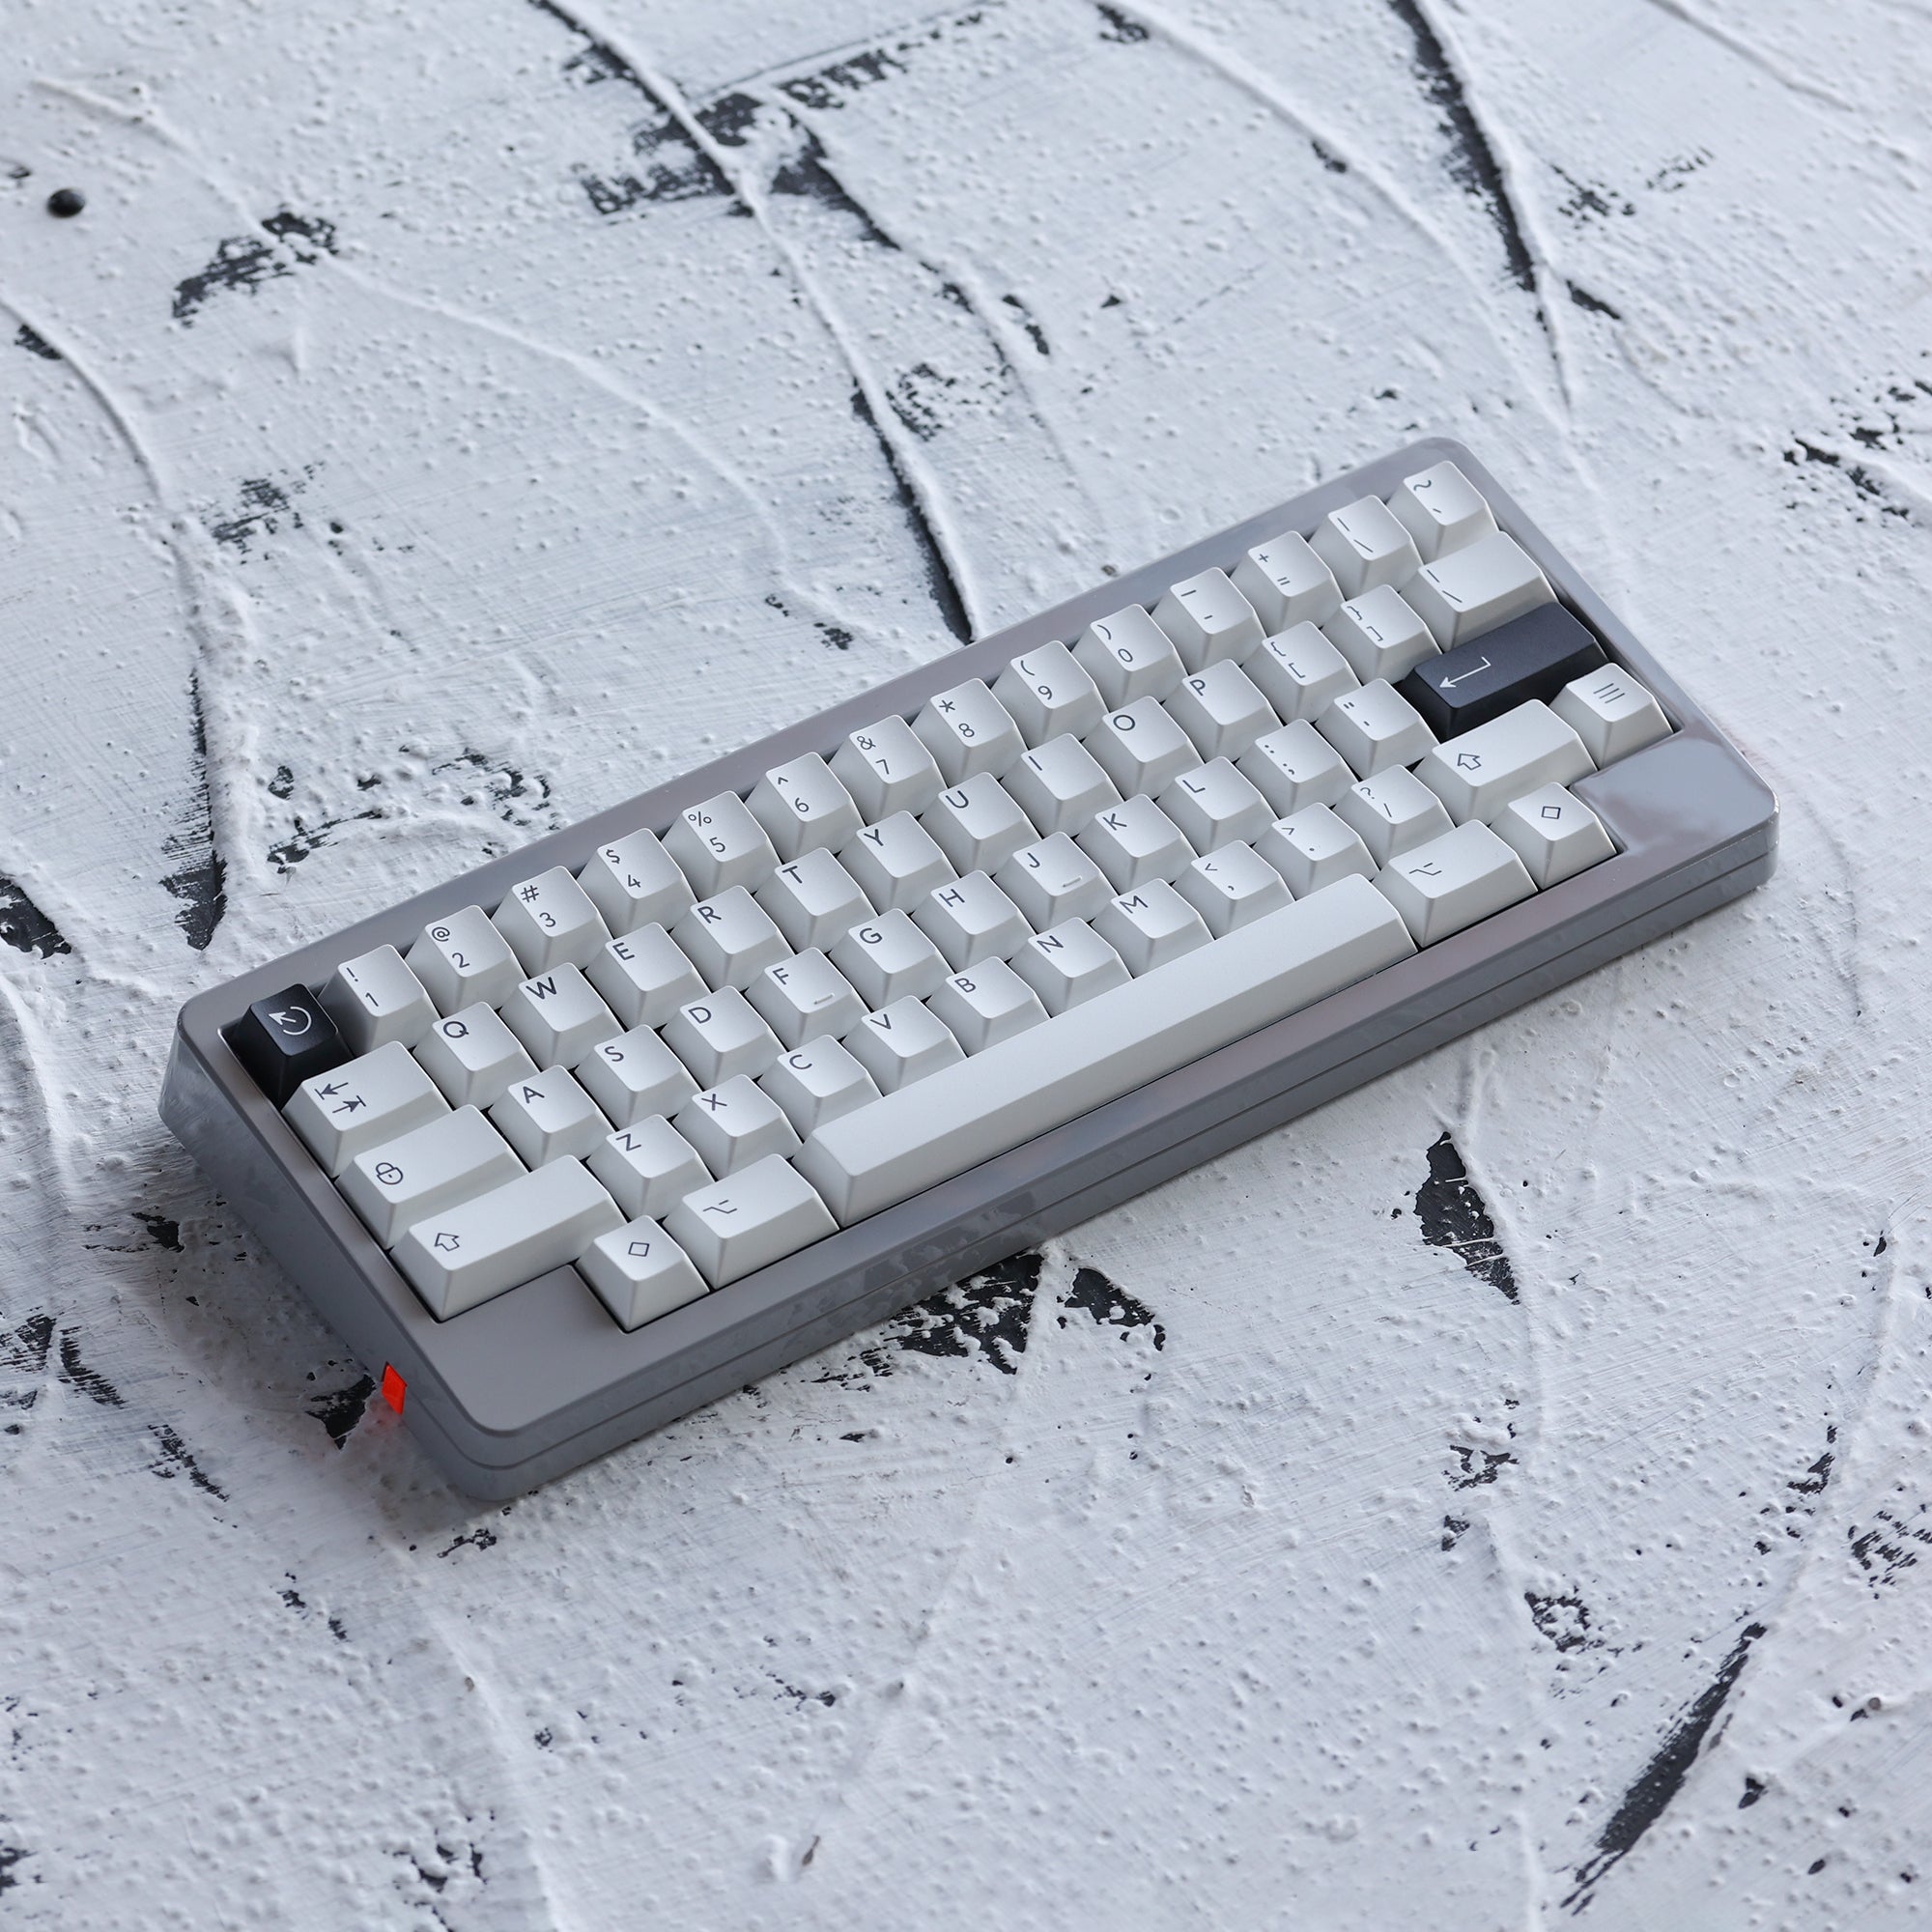 KBDfans Custom Keyboard Ready to use D60lite PC Hot-swap Mechanical Keyboard With PBTfans BOW Keycaps